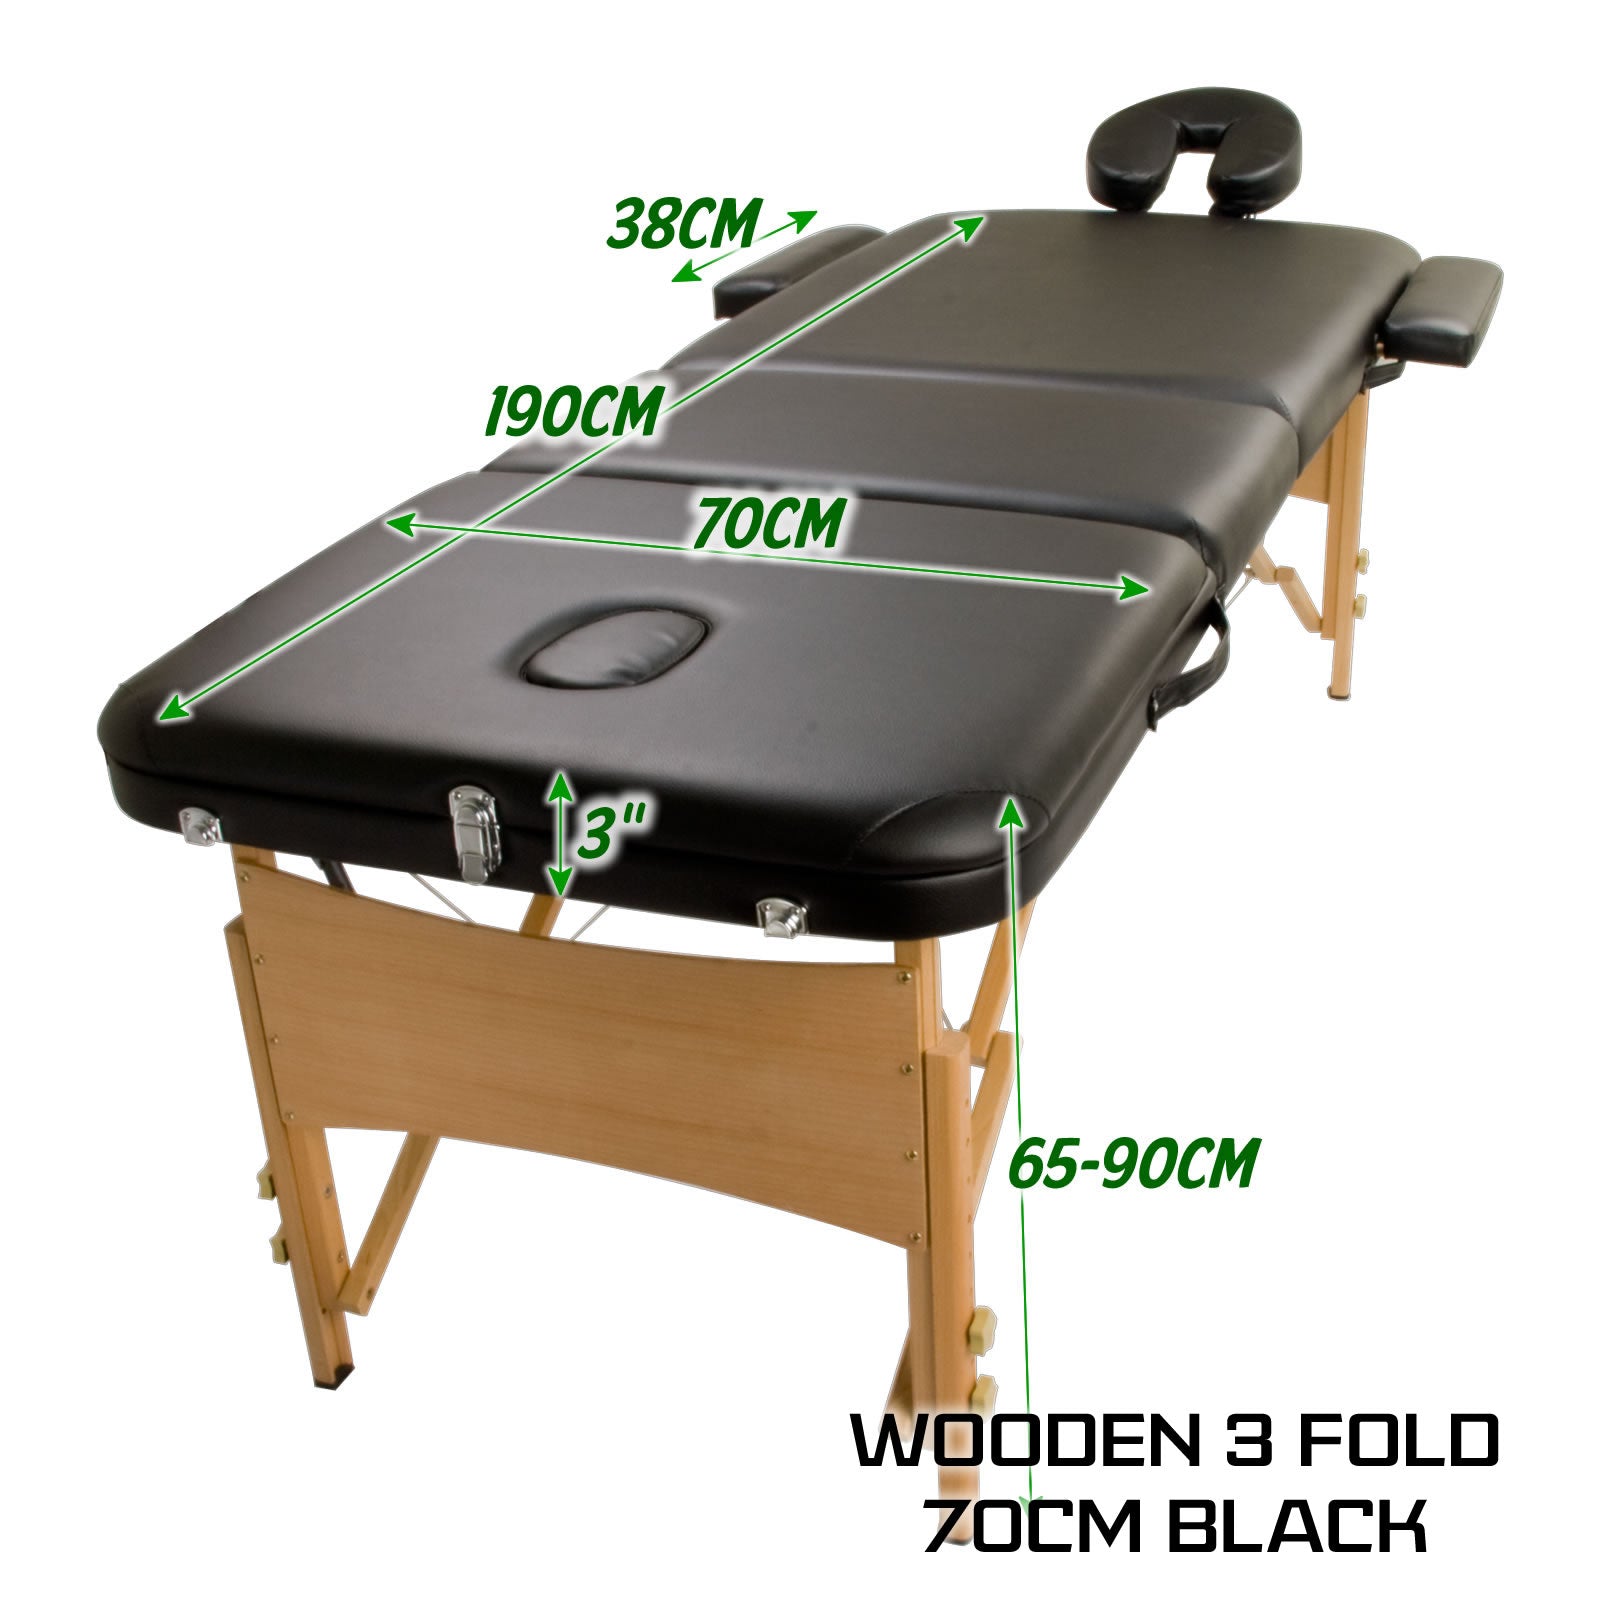 Black Portable Massage Table Bed Therapy Waxing 3 Fold 70cm Wooden - image12